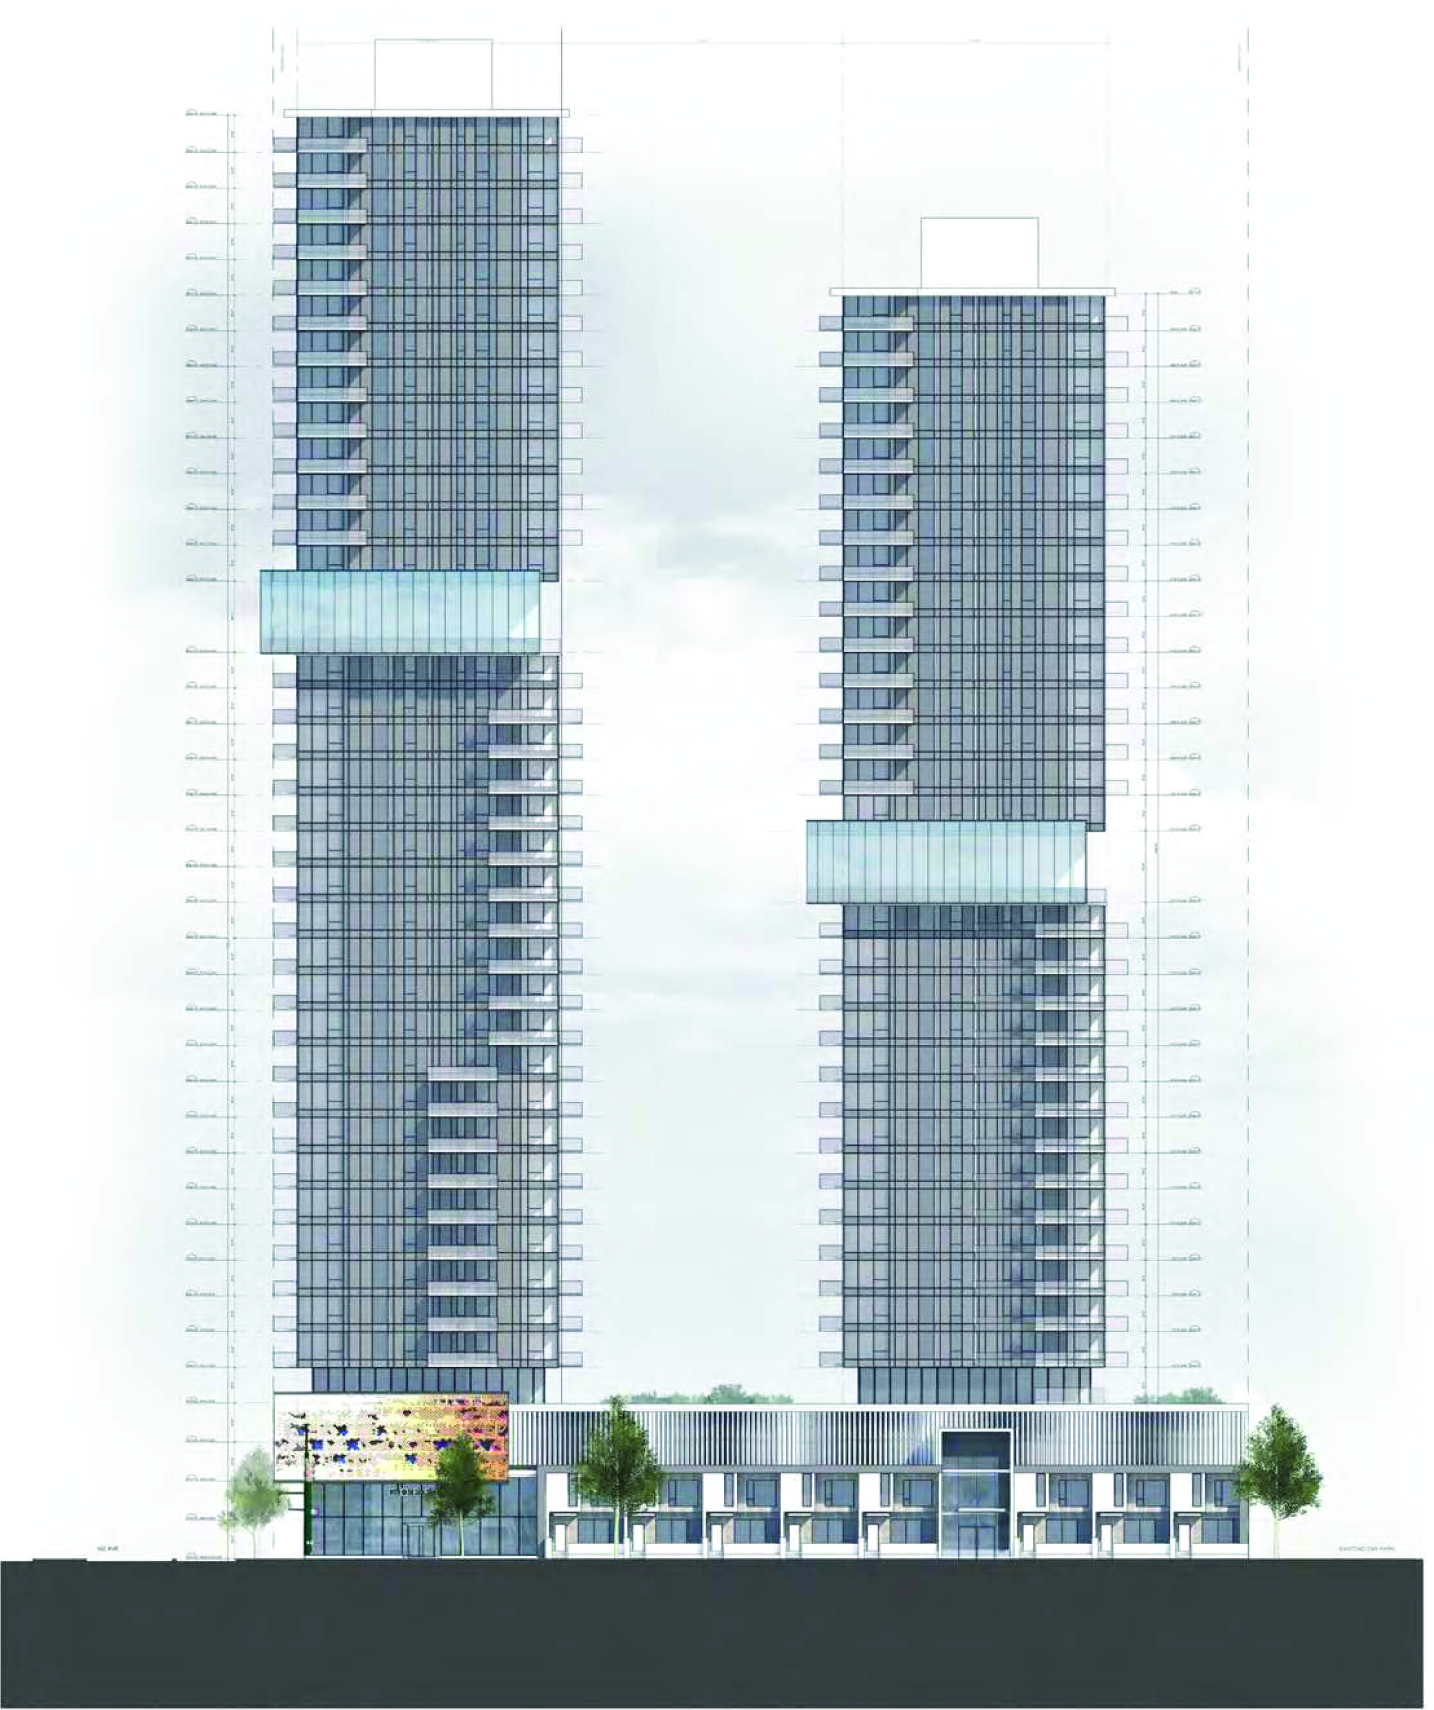 The Shift residential towers are 36 and 40 storeys tall with a total of 700 units and are being proposed by Edgar Development. The structures will be built over a four-storey base or podium that includes retail stores and townhouse units.